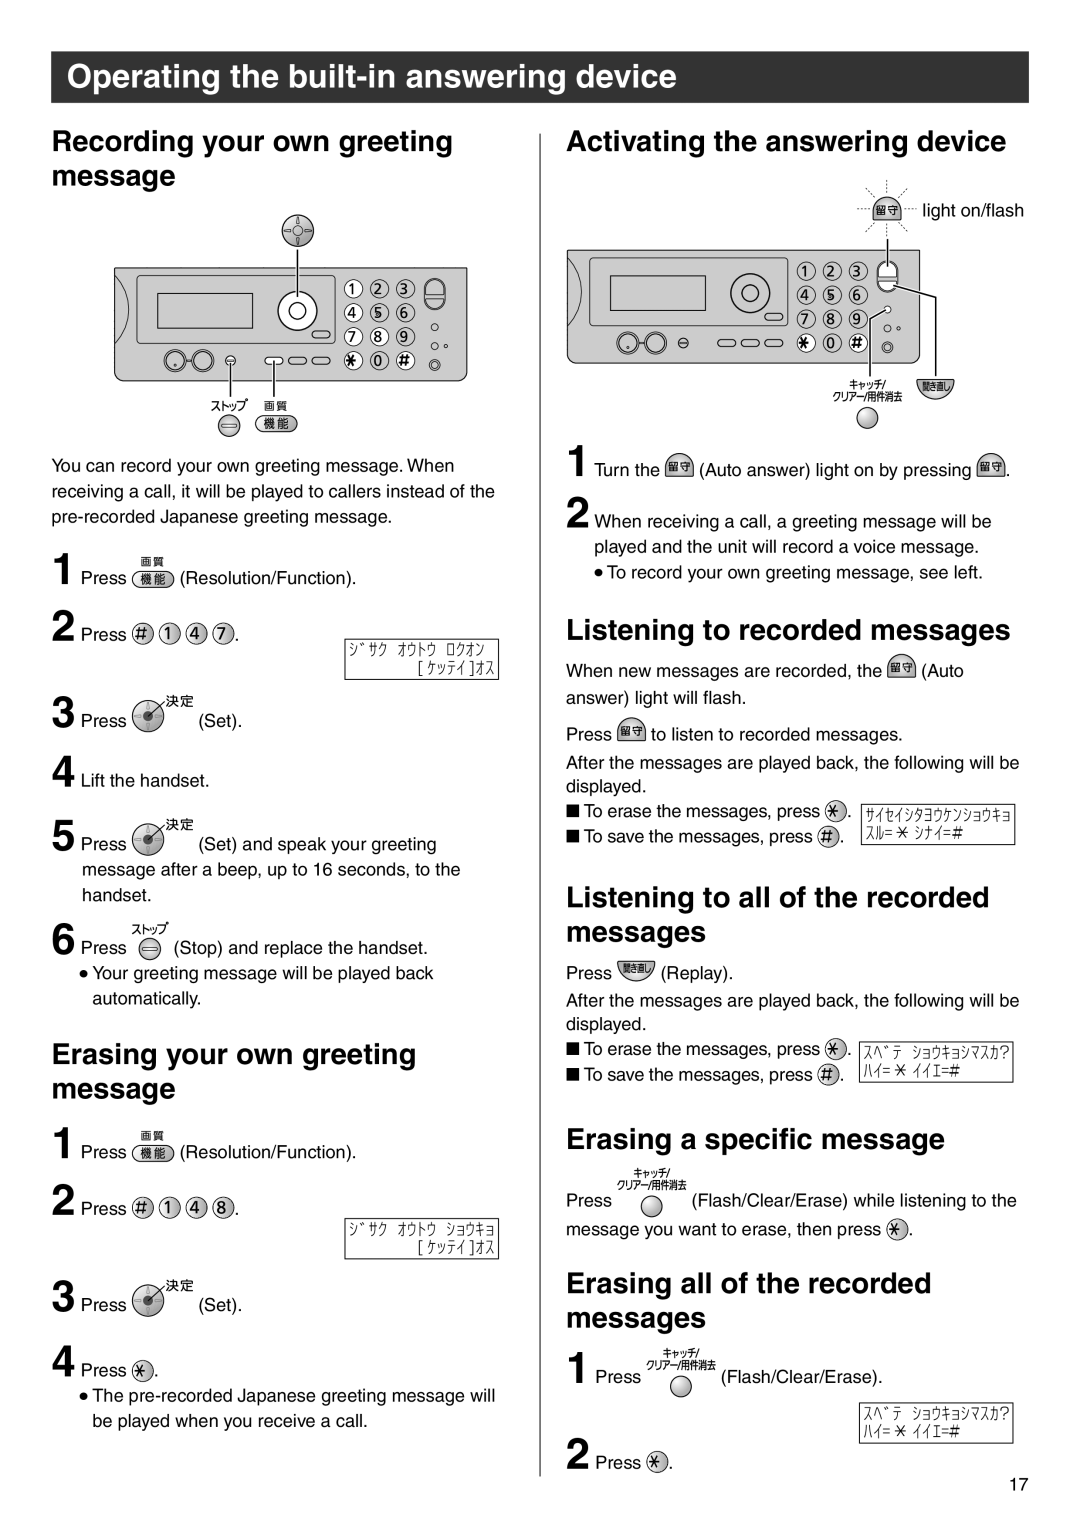 Panasonic KX-PW506DW, KX-PW506DL manual Operating the built-in answering device, Recording your own greeting message 